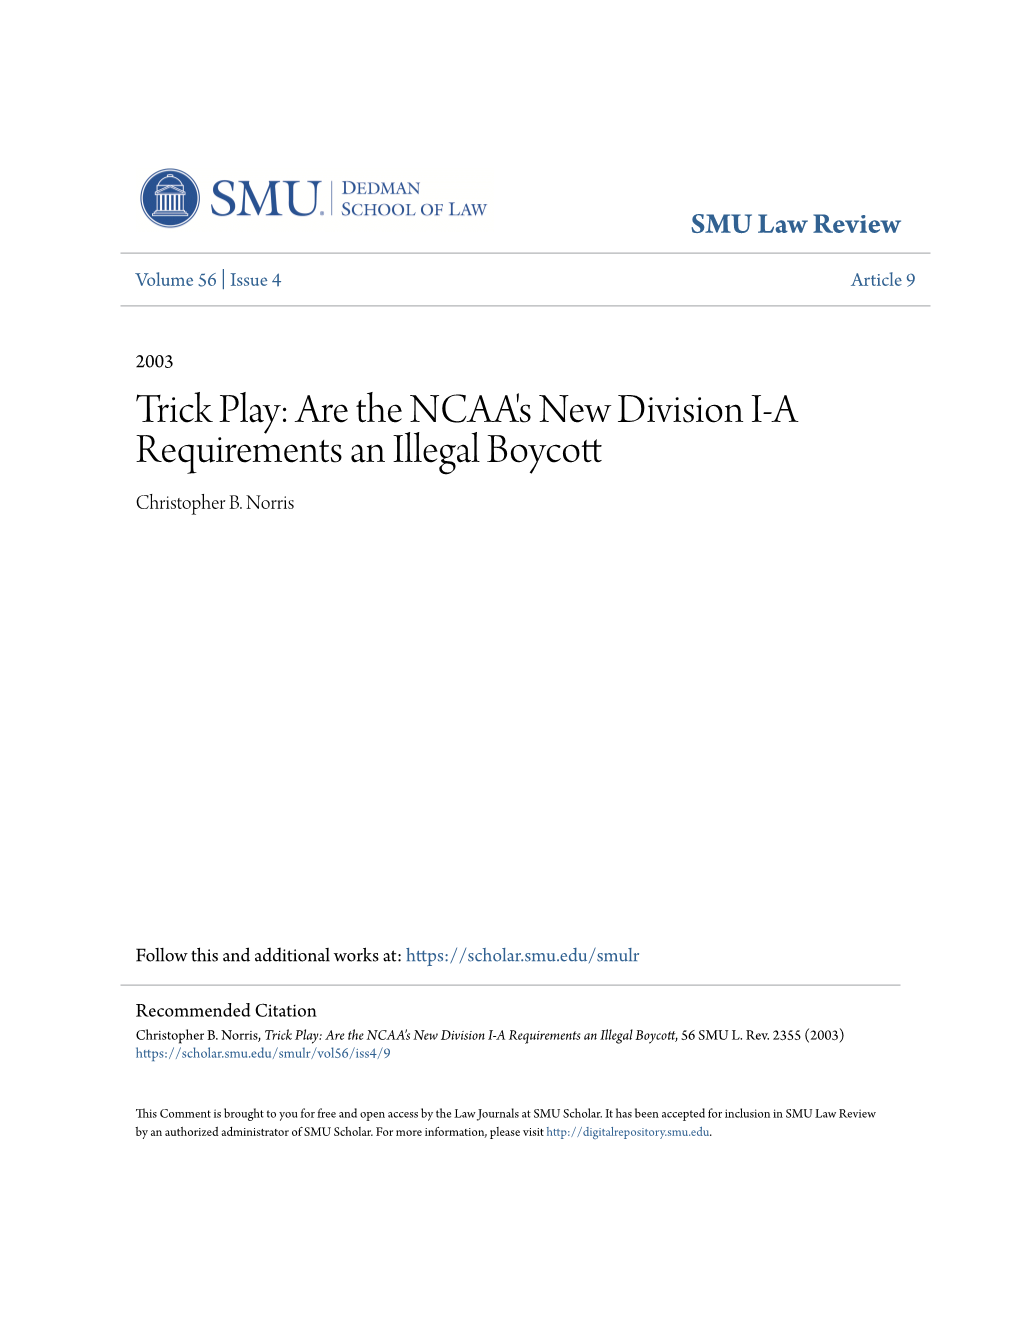 Are the NCAA's New Division IA Requirements an Illegal